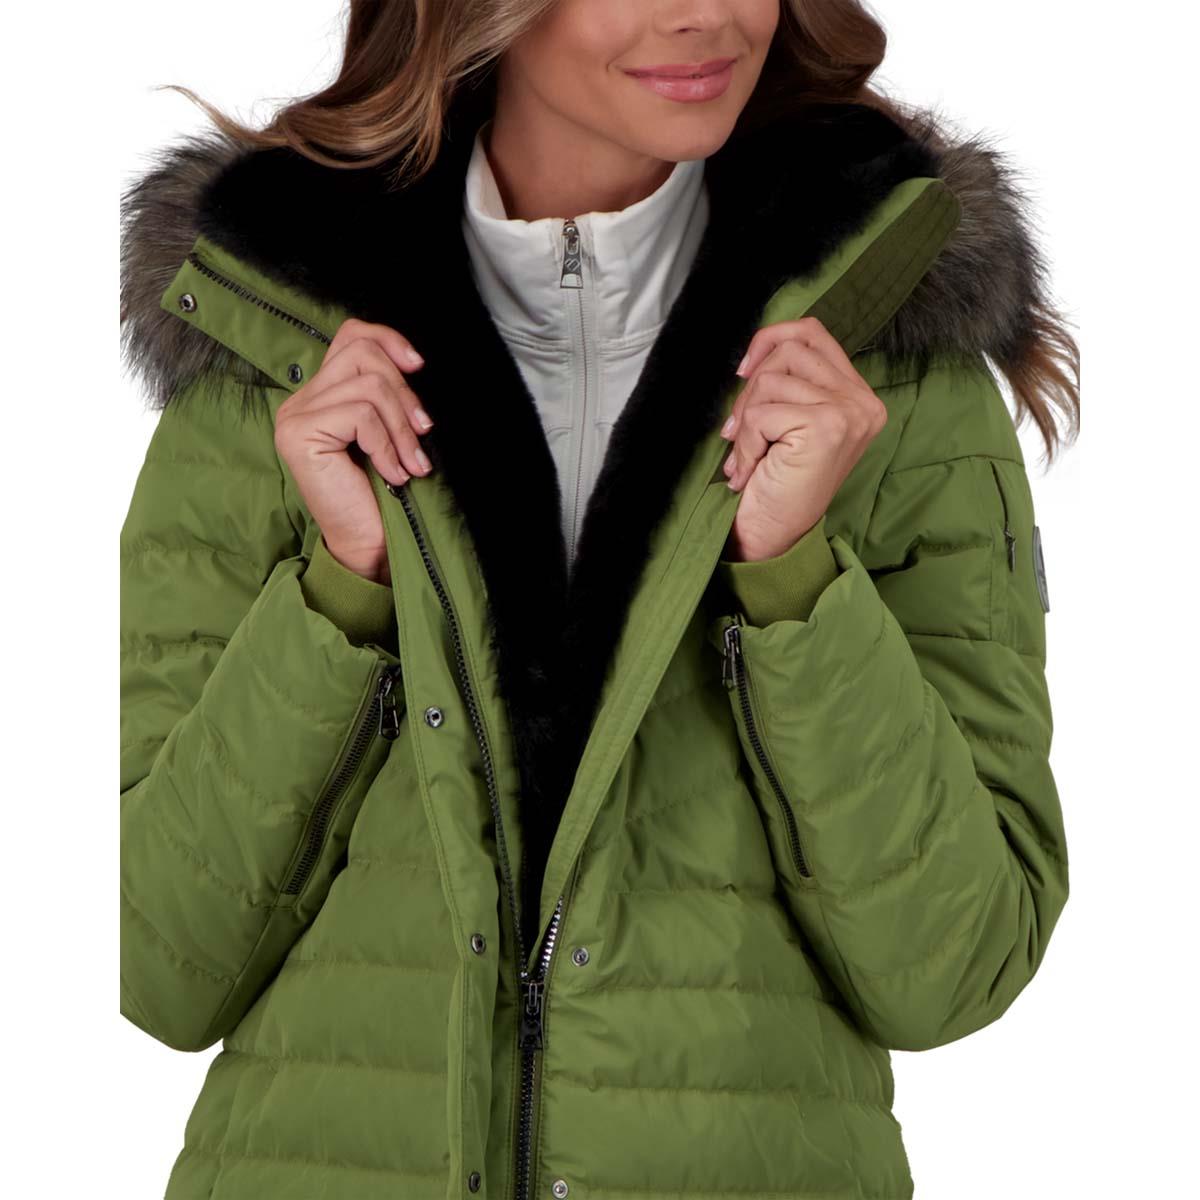 WOMEN'S BLOSSOM DOWN PARKA WITH FAUX FUR - Saguaro Green